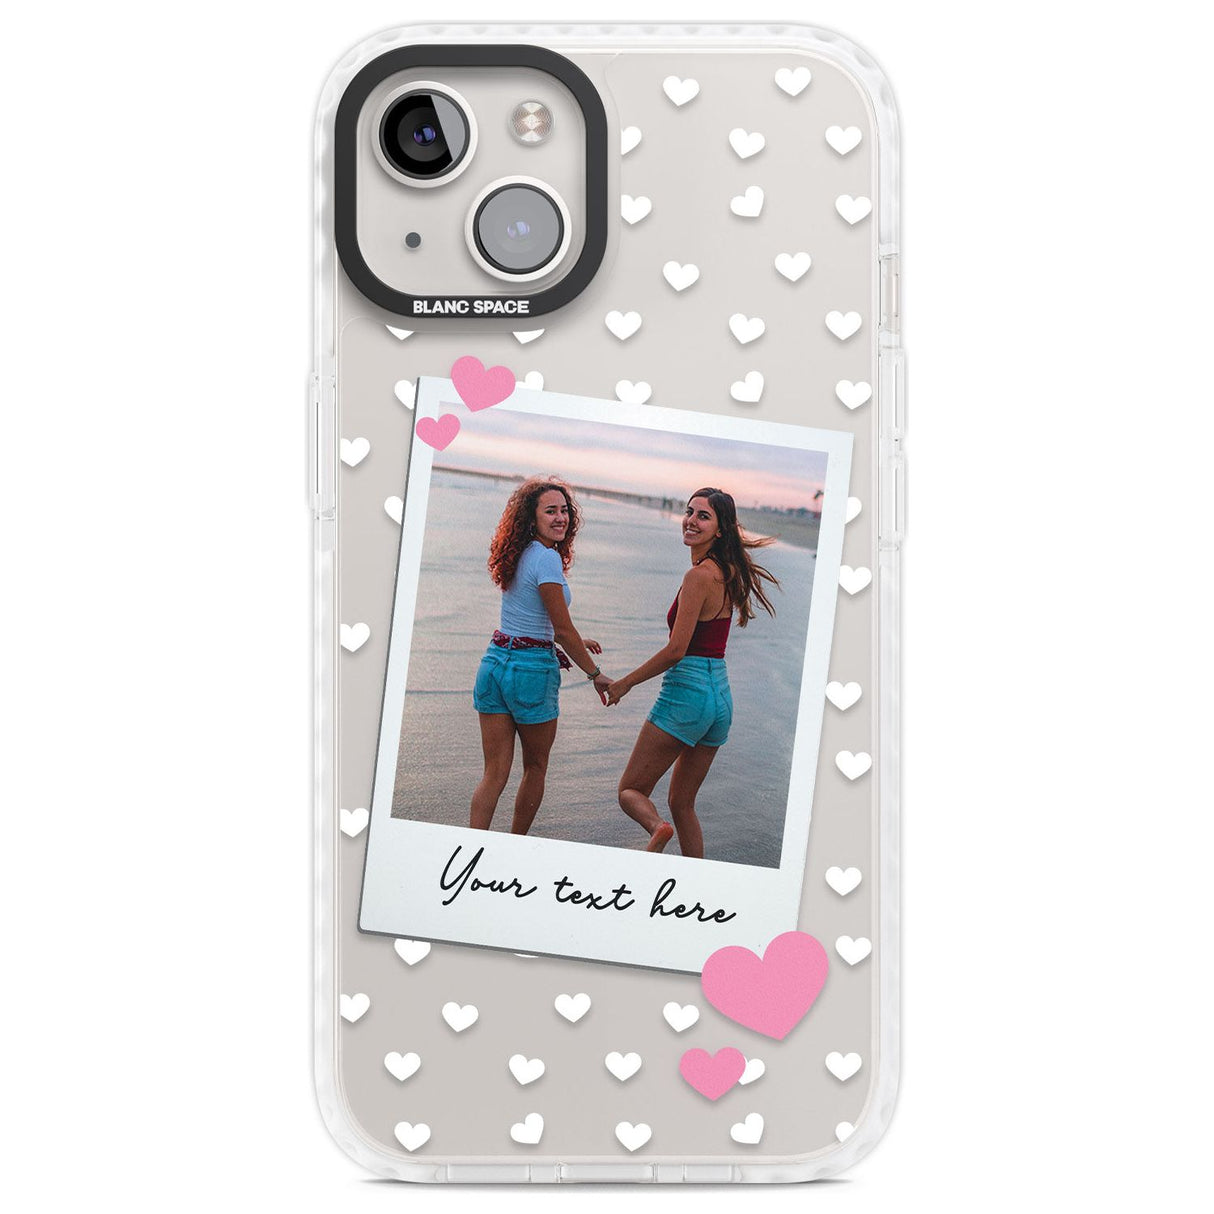 Personalised Instant Film & Hearts Photo Custom Phone Case iPhone 13 / Impact Case,iPhone 14 / Impact Case,iPhone 15 Plus / Impact Case,iPhone 15 / Impact Case Blanc Space